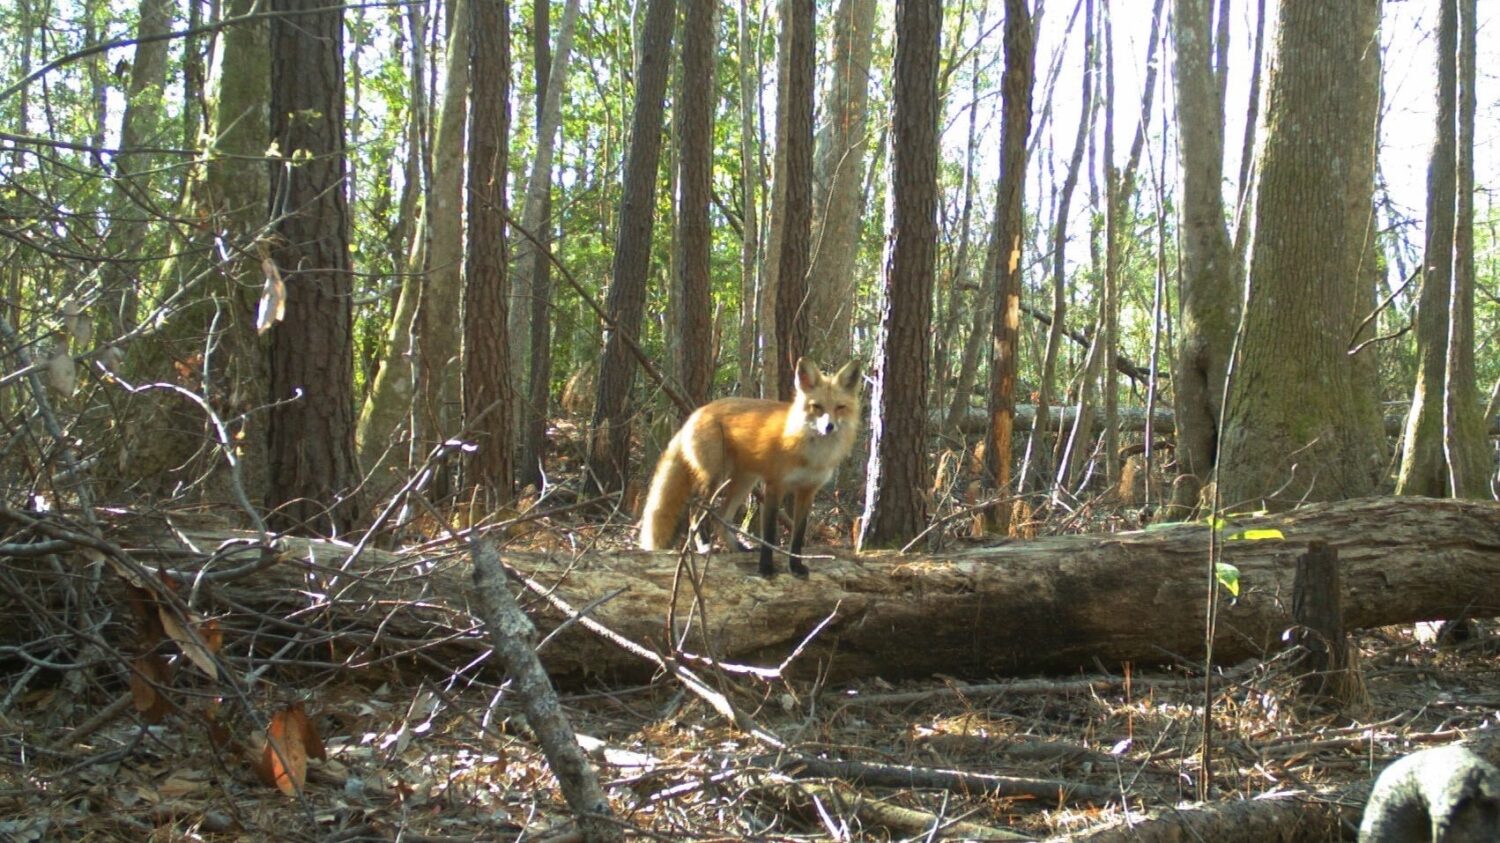 Red fox in the forest - How Linked Data, Artificial Intelligence Could Help Animals - College of Natural Resources News NC State University